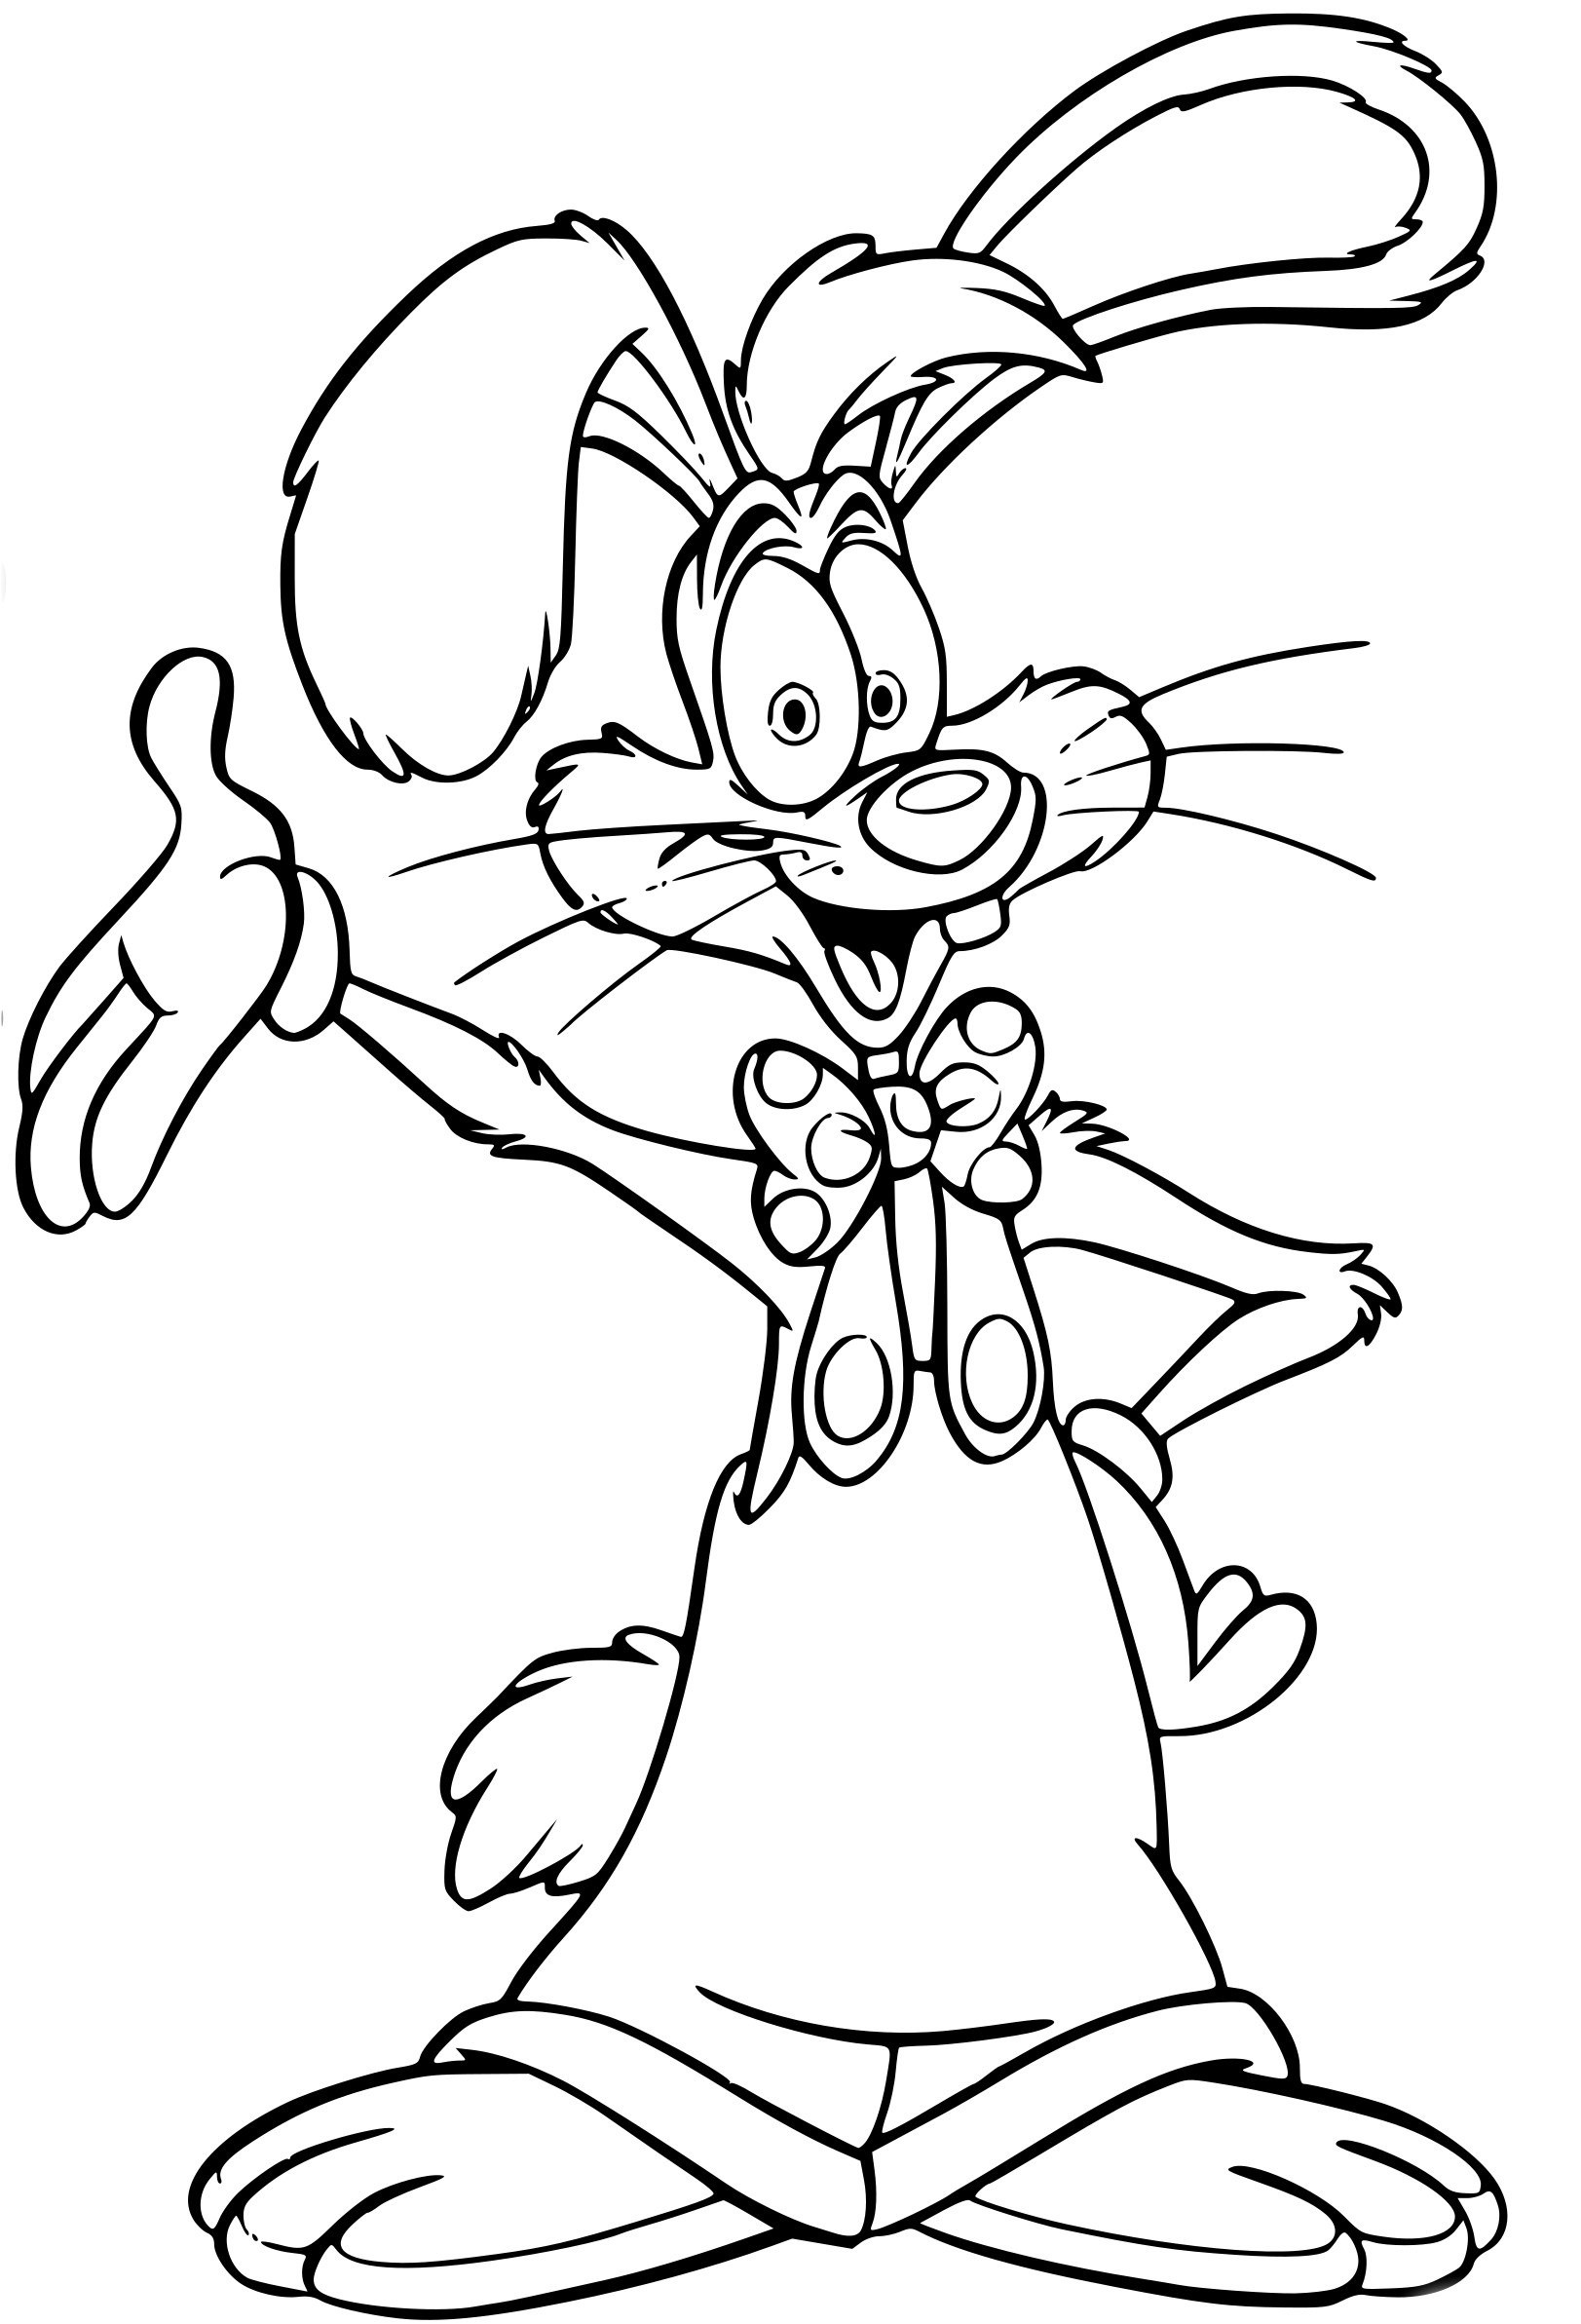 Roger rabbit coloring pages